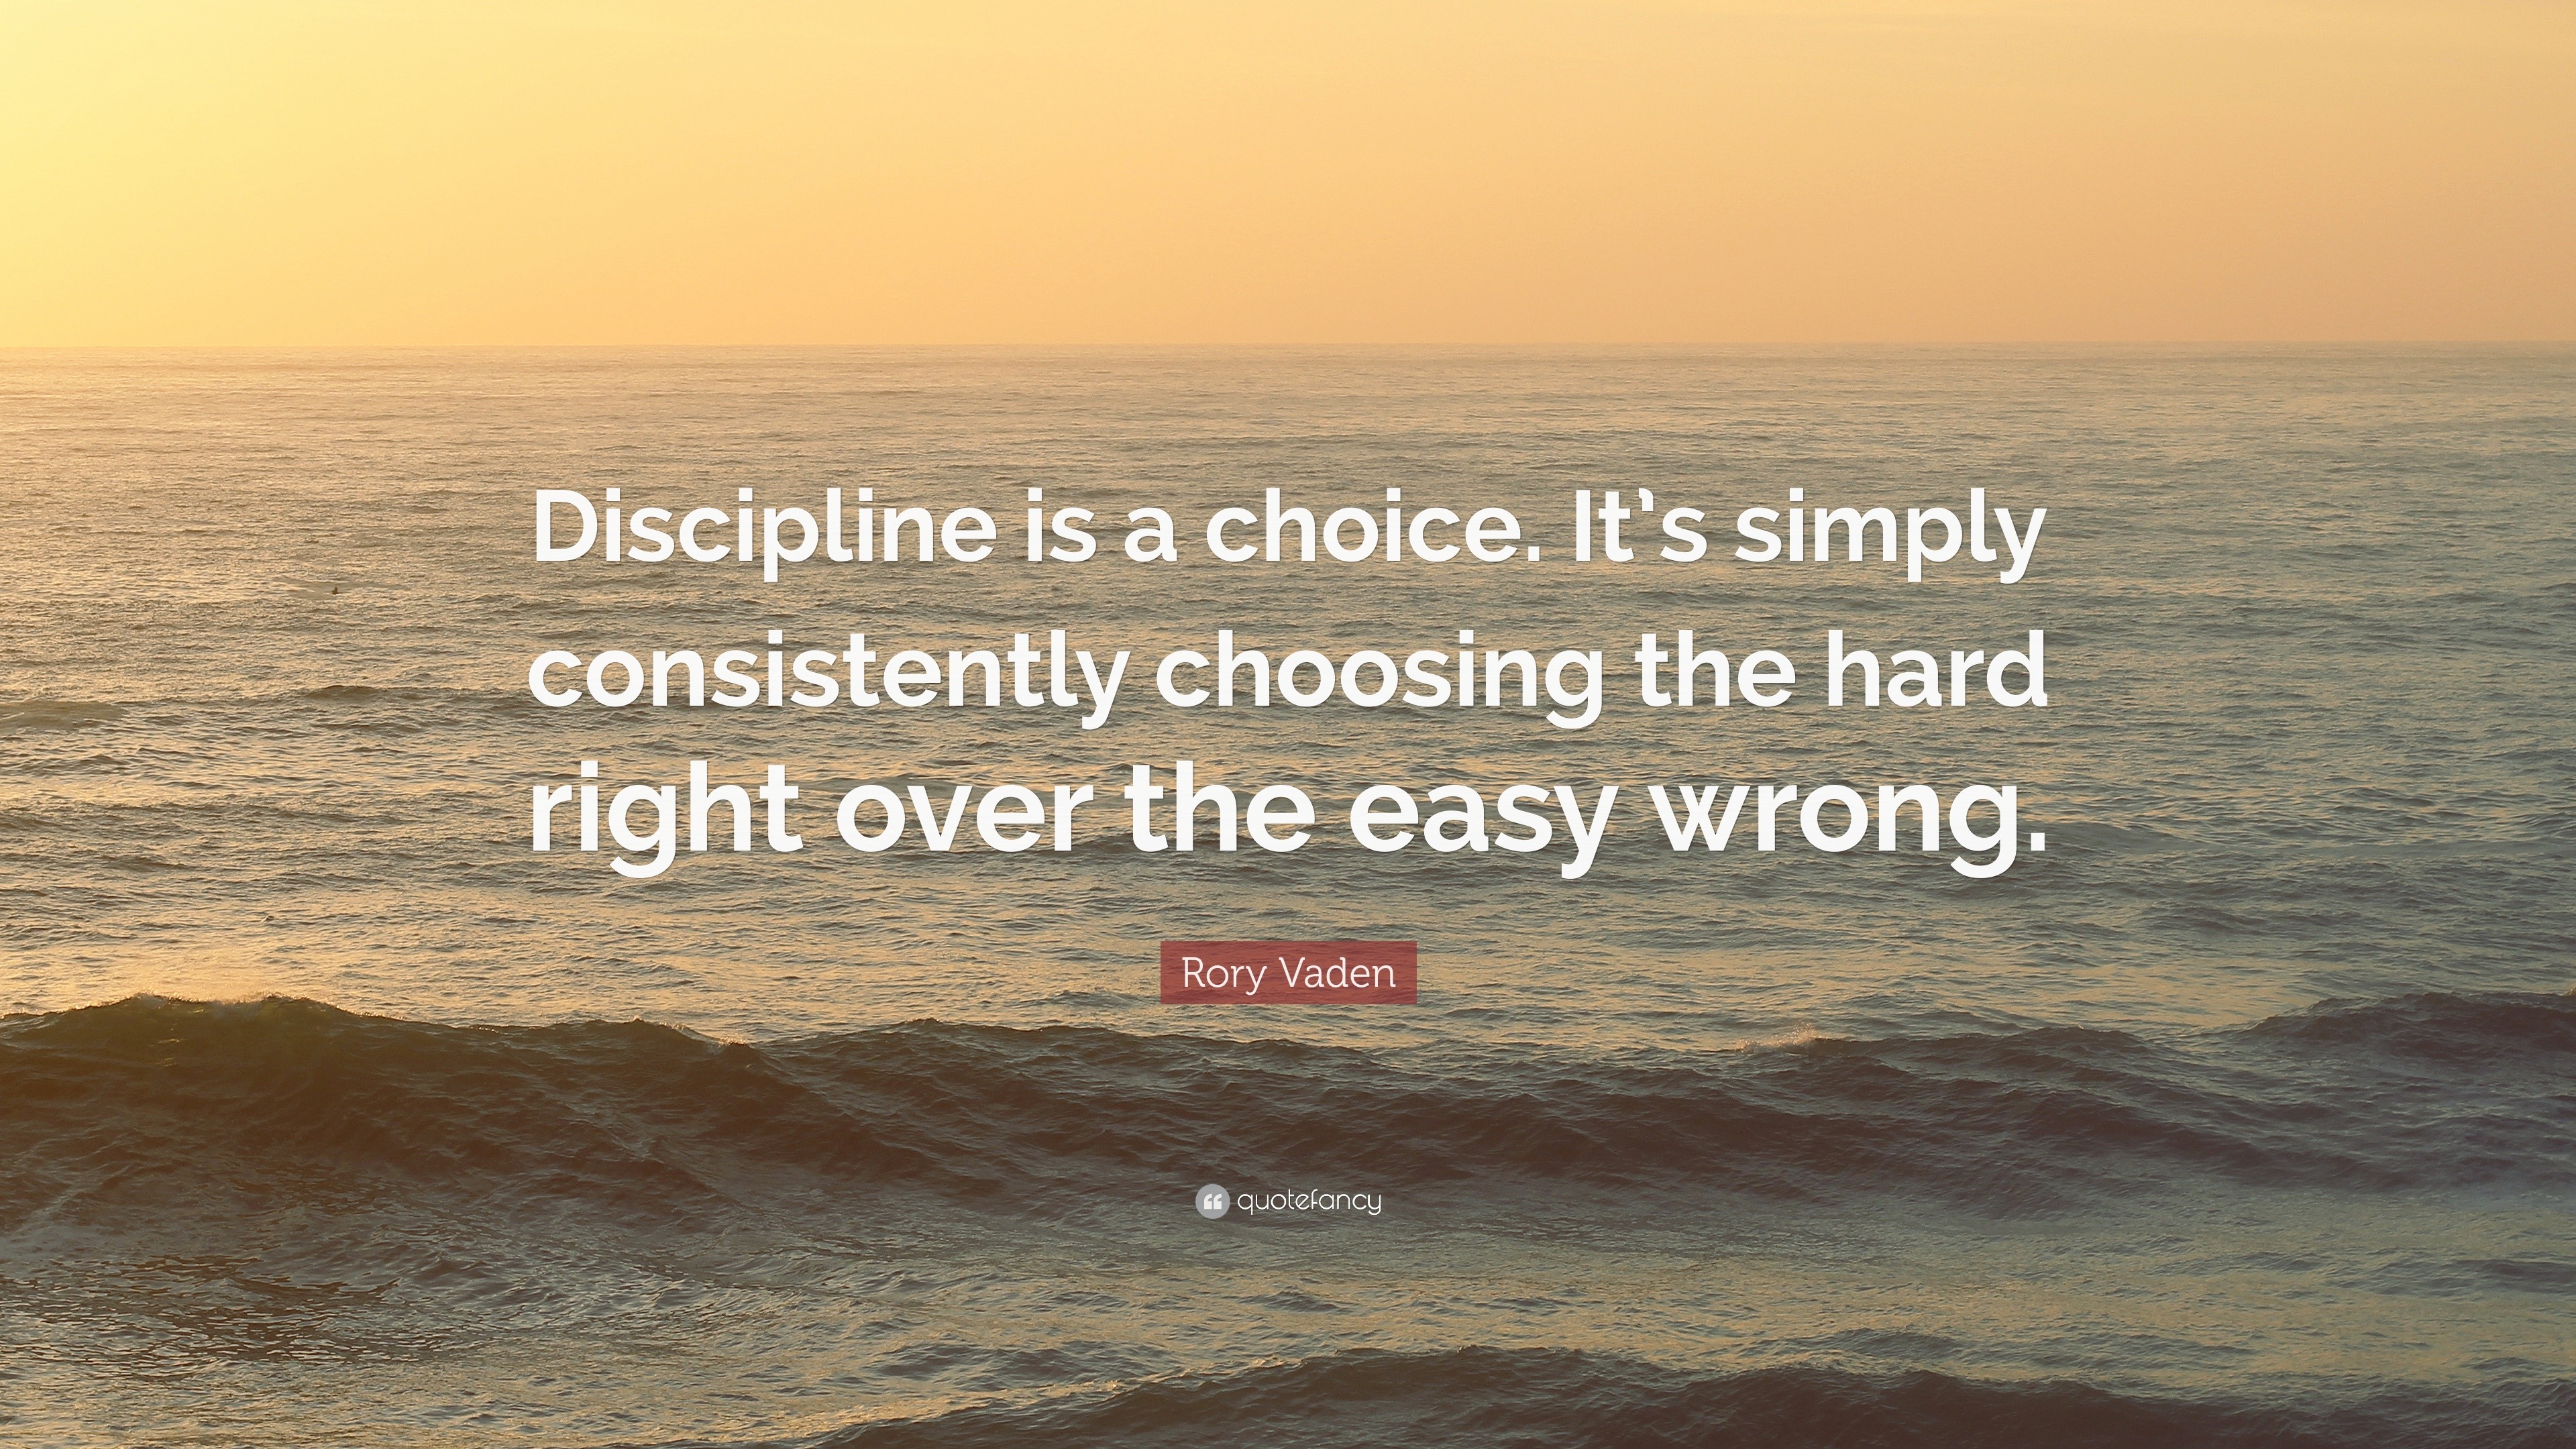 Rory Vaden Quote: “Discipline is a choice. It’s simply consistently